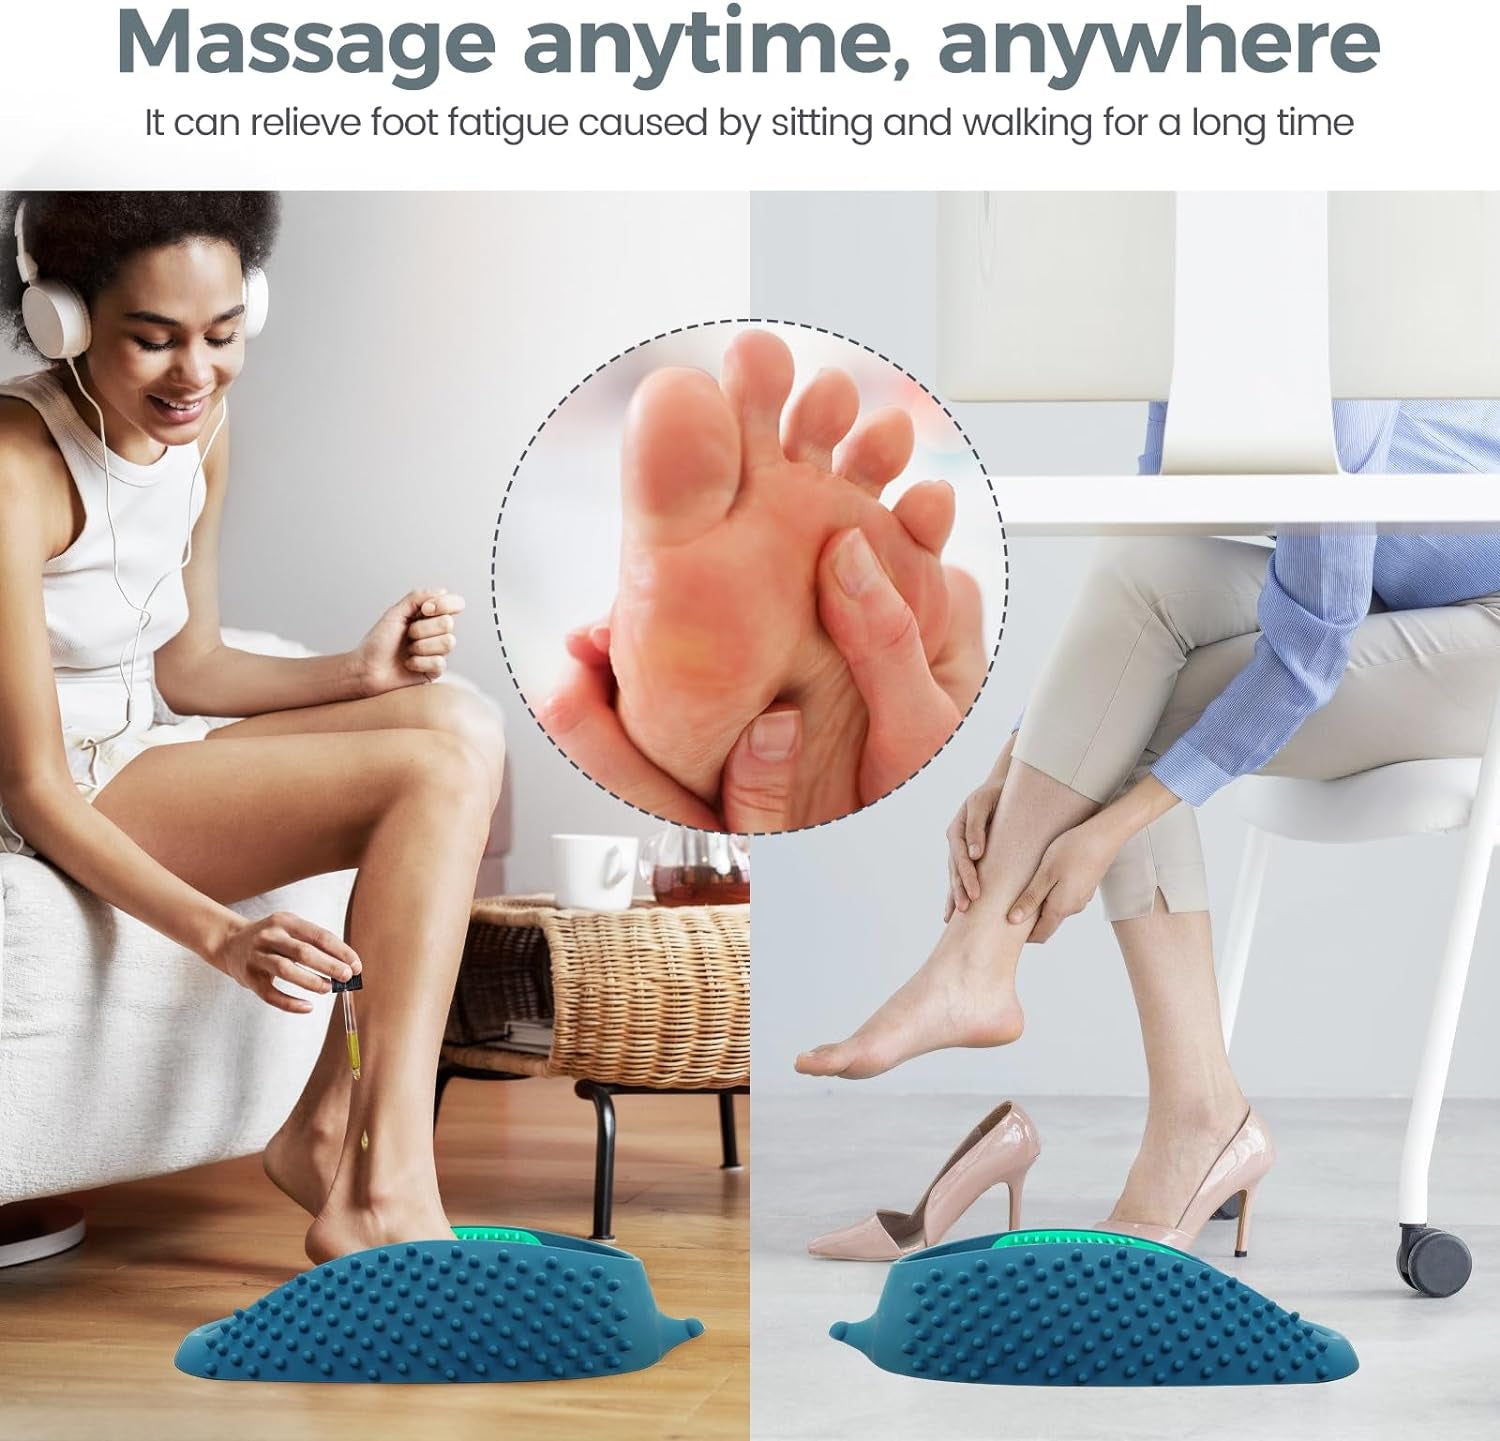 Lu-Lala Shower Foot Scrubber - Portable Manual Foot Massager Cleaner Care for Soothe Feet Neuropathy Achy, Improve Foot Circulation - Wet and Dry Use (Blue-Green)